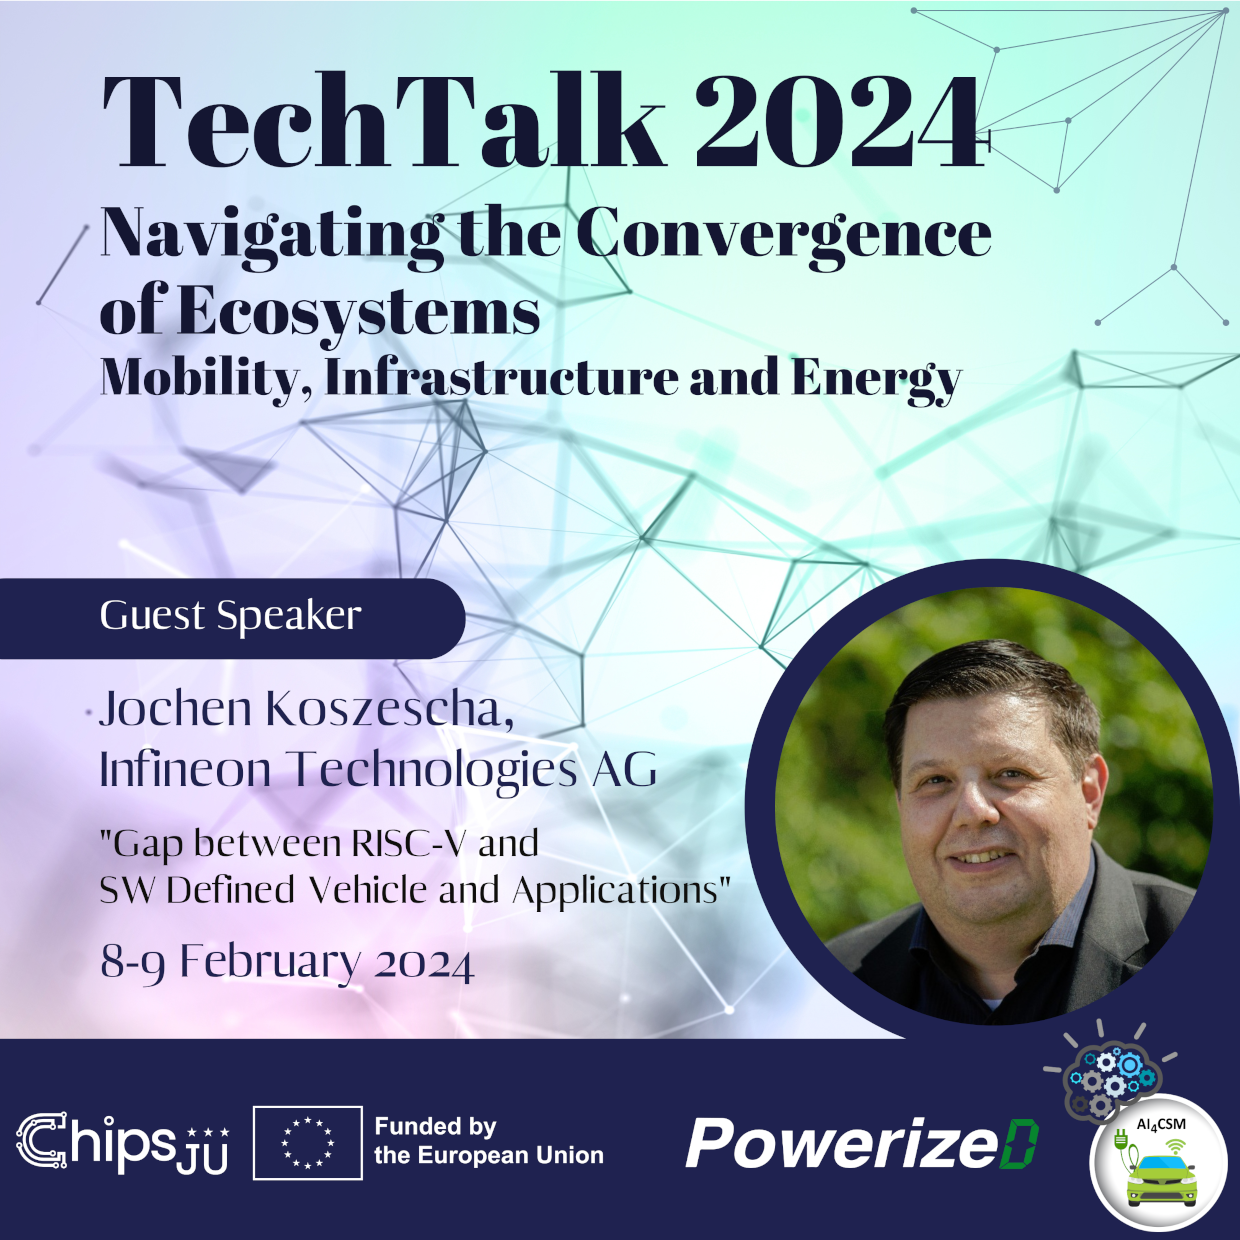 AI4CSM will be presented at the TechTalk2024 strategic event in Barcelona